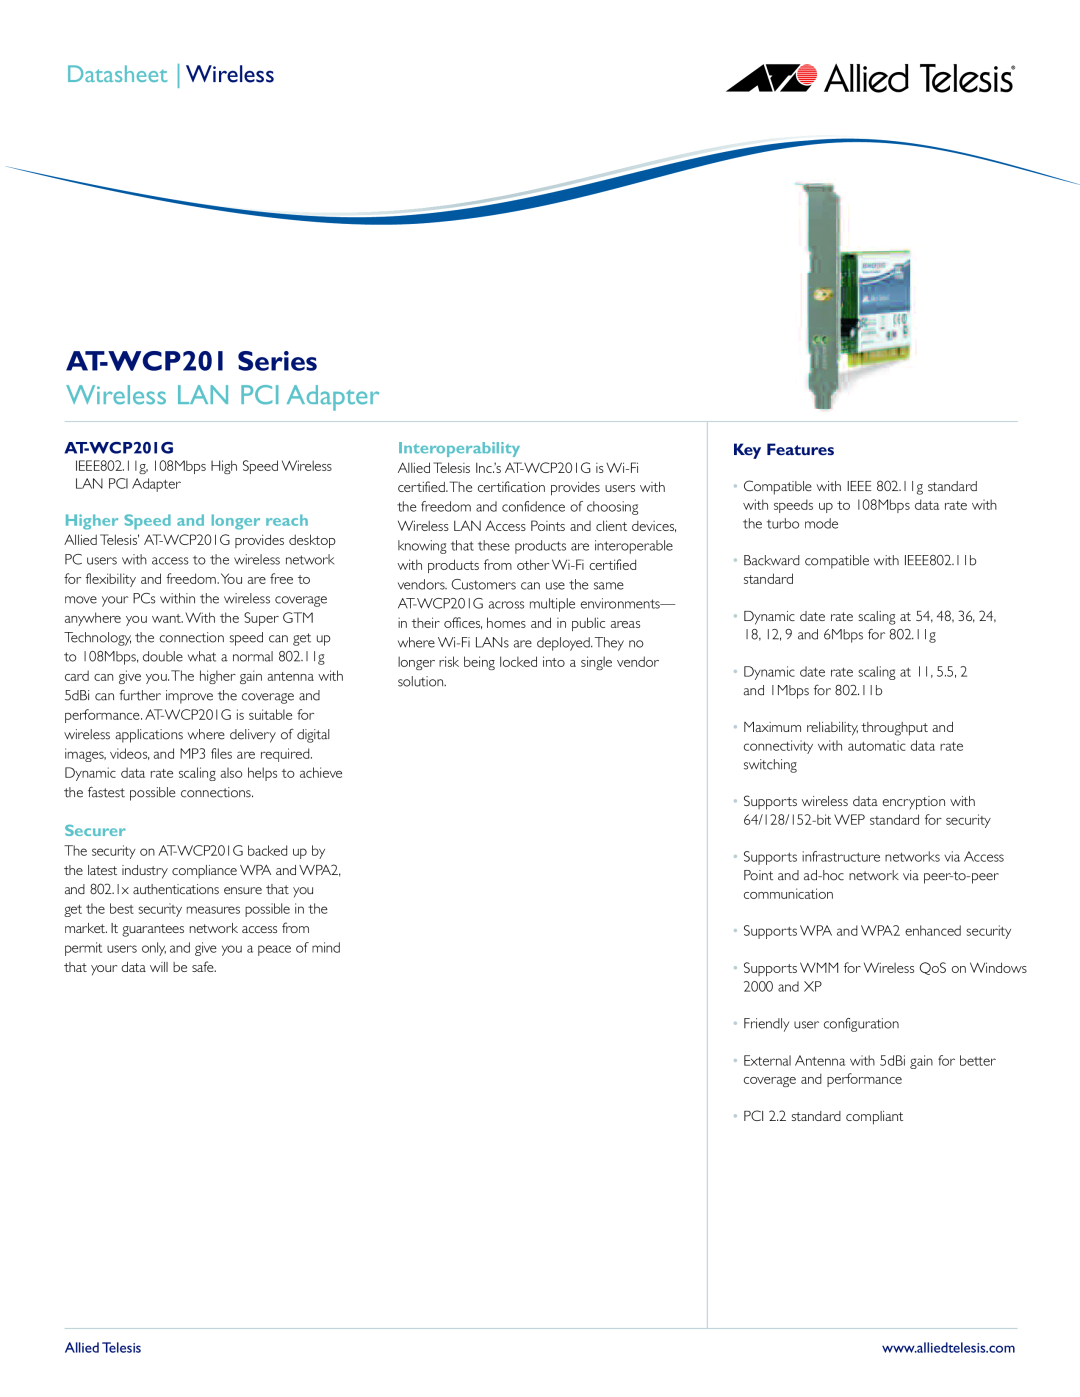 Allied Telesis AT-WCP201G-001 manual Wireless LAN PCI Adapter, Key Features, AT-WCP201 Series, Datasheet Wireless 